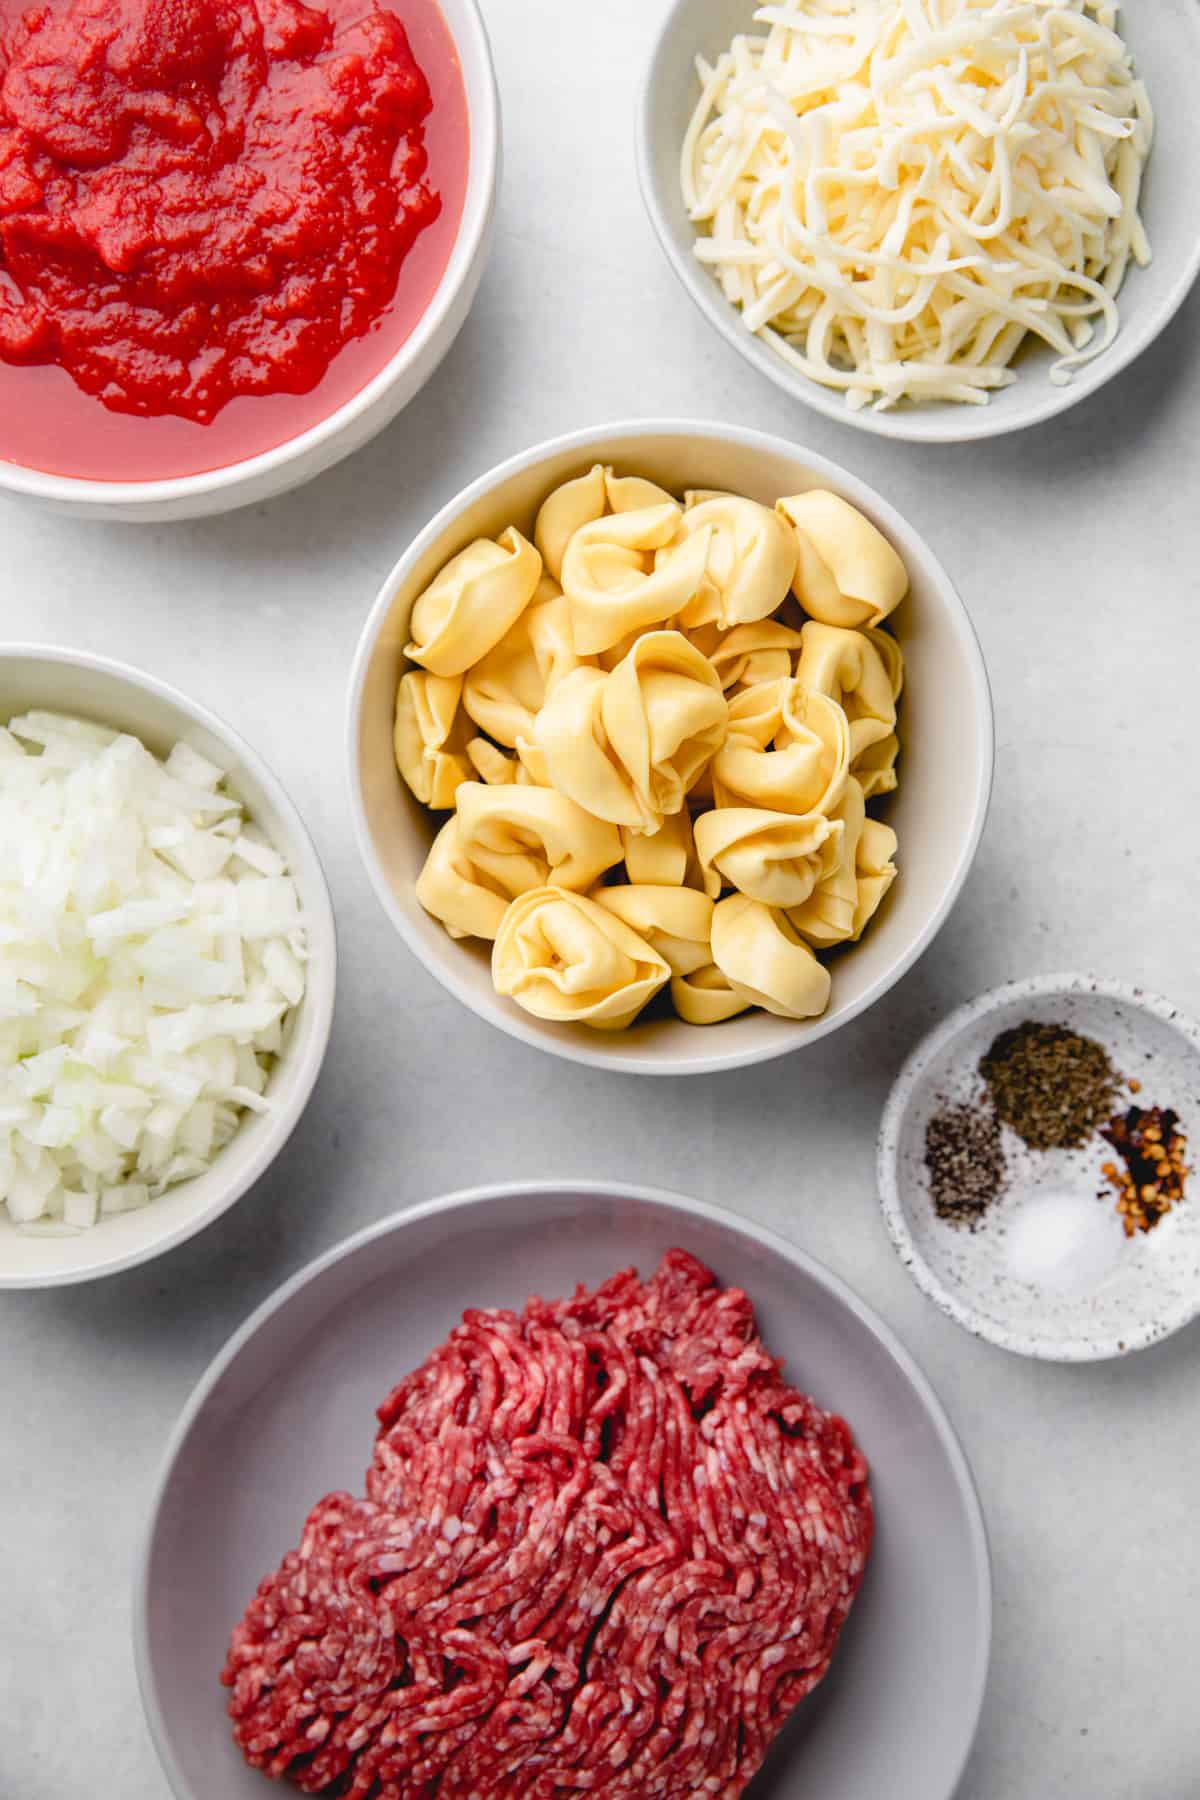 Ingredients to make Baked Tortellini with meat sauce.